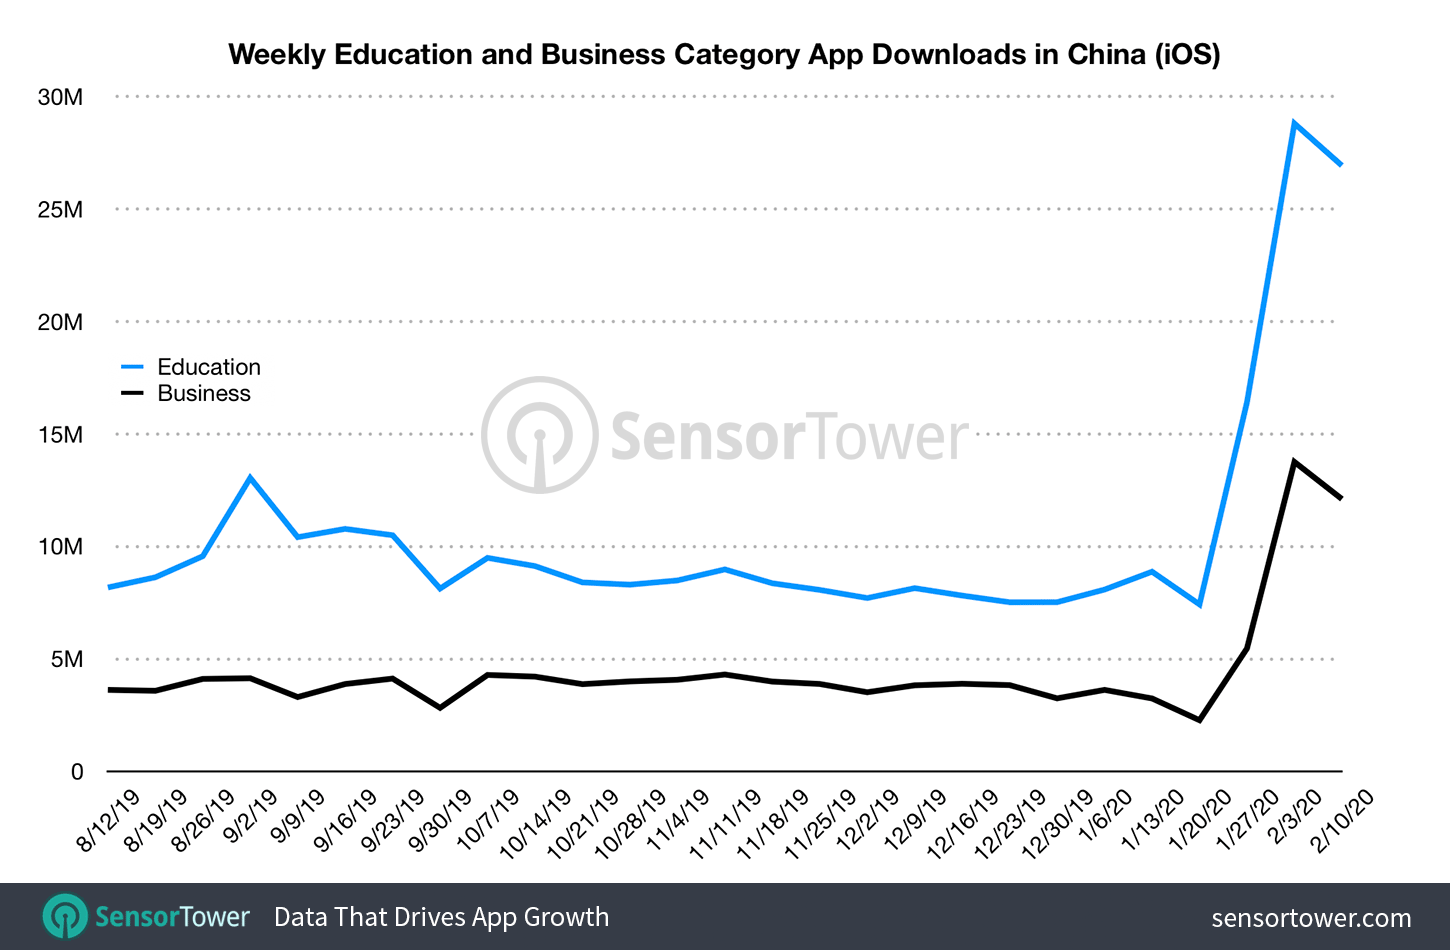 Weekly Downloads of Business and Education Apps in China Between August 2019 and February 2020